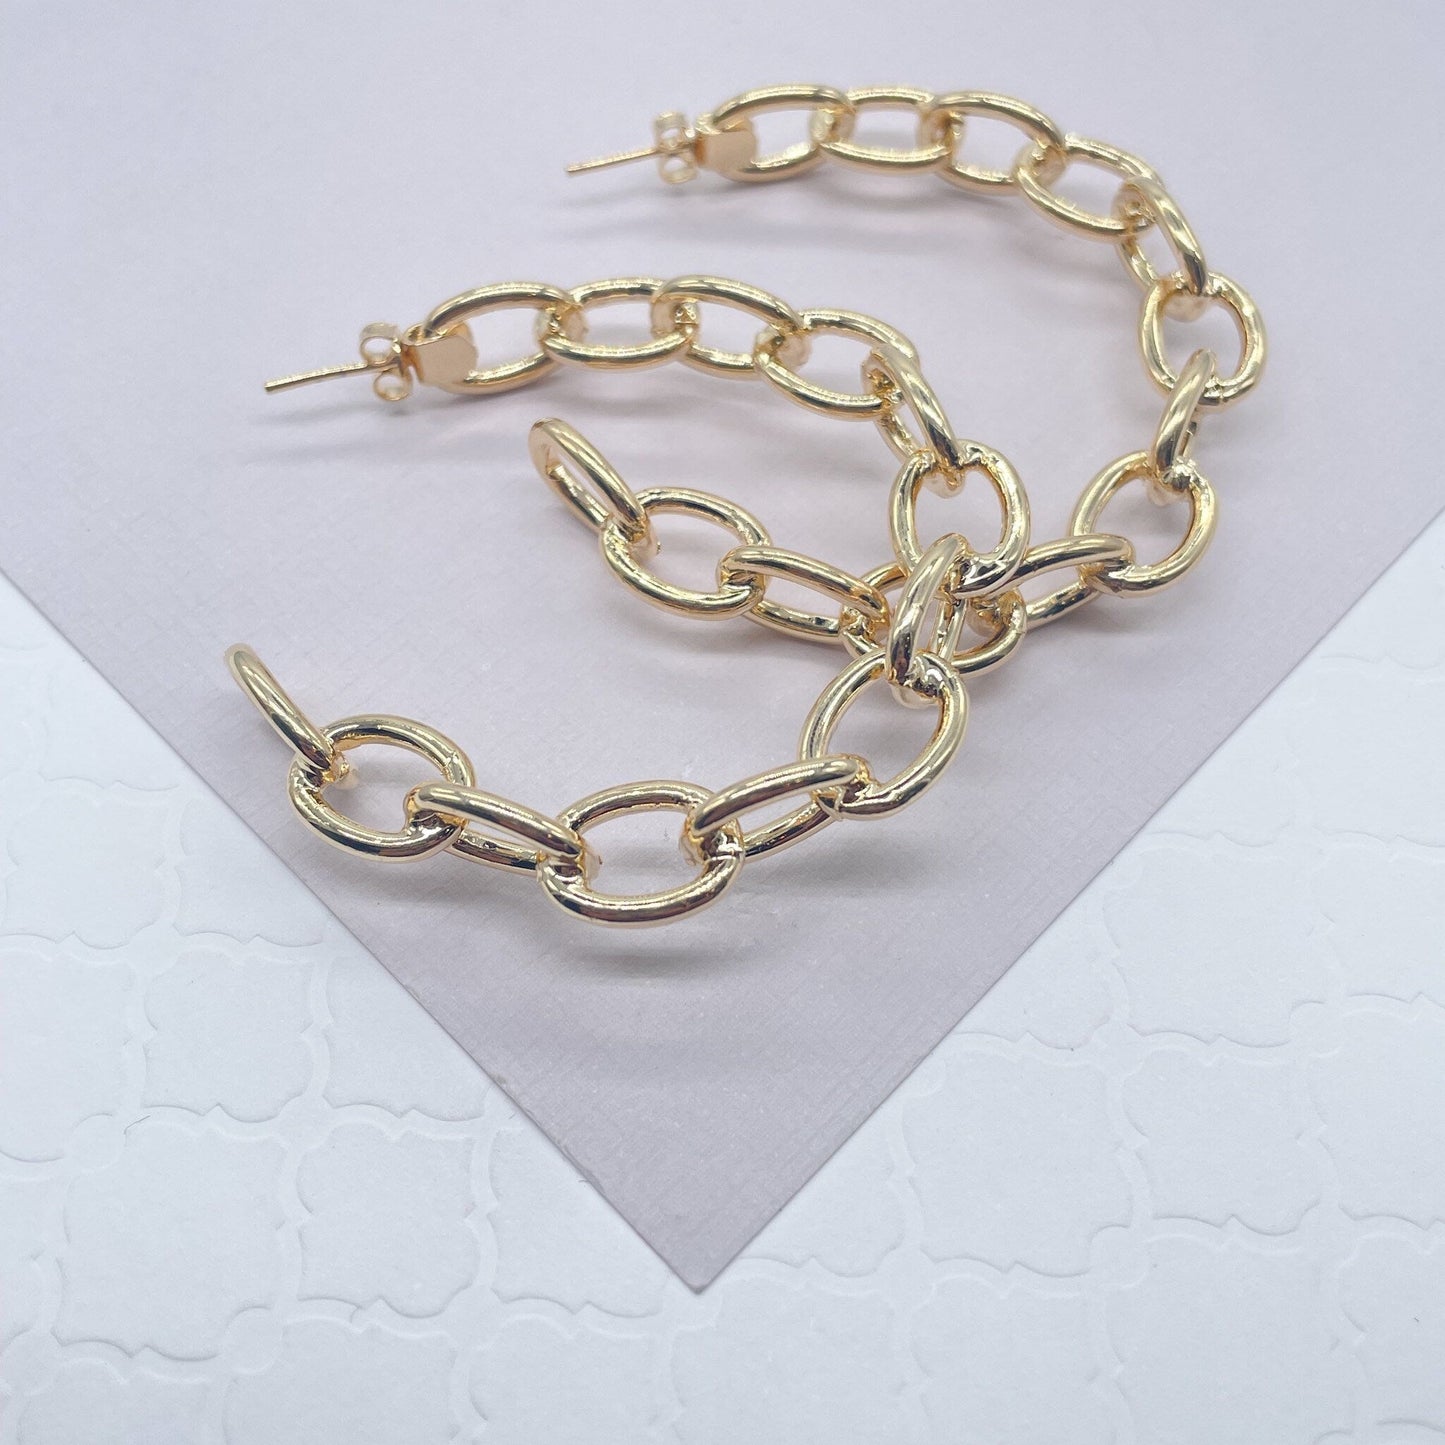 18k Gold Layered Link Chain Hoop Earrings, C-Hoops Large Cable Chain Link Style